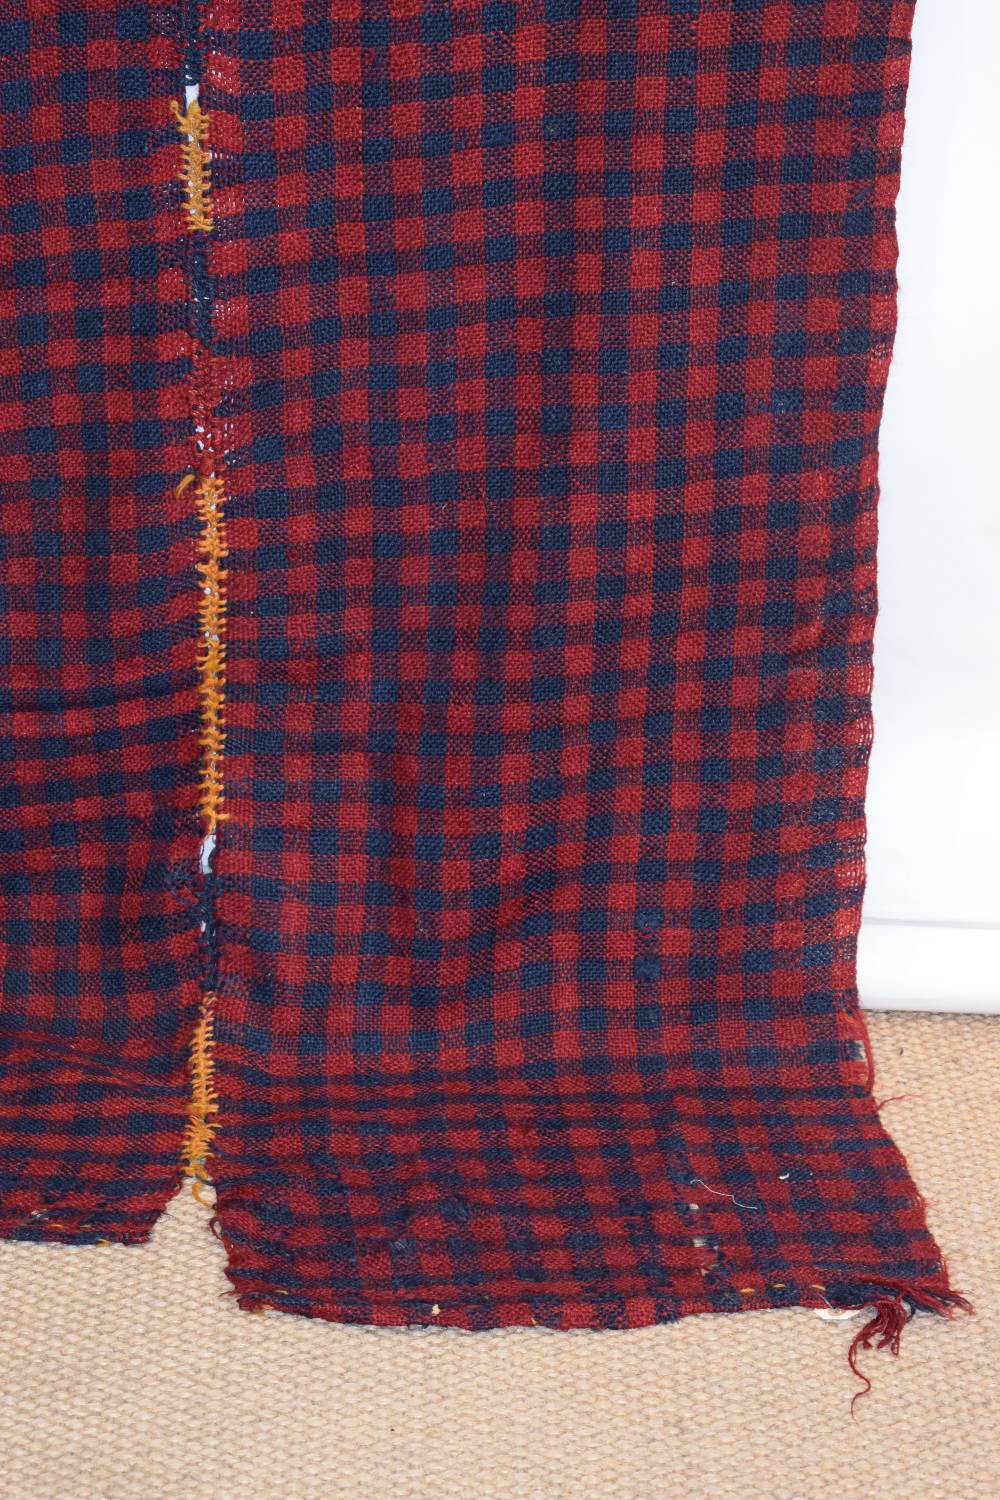 Anatolian wool twill cover in blue and claret check, Diyabakir, south east Anatolia, mid 20th - Image 2 of 12